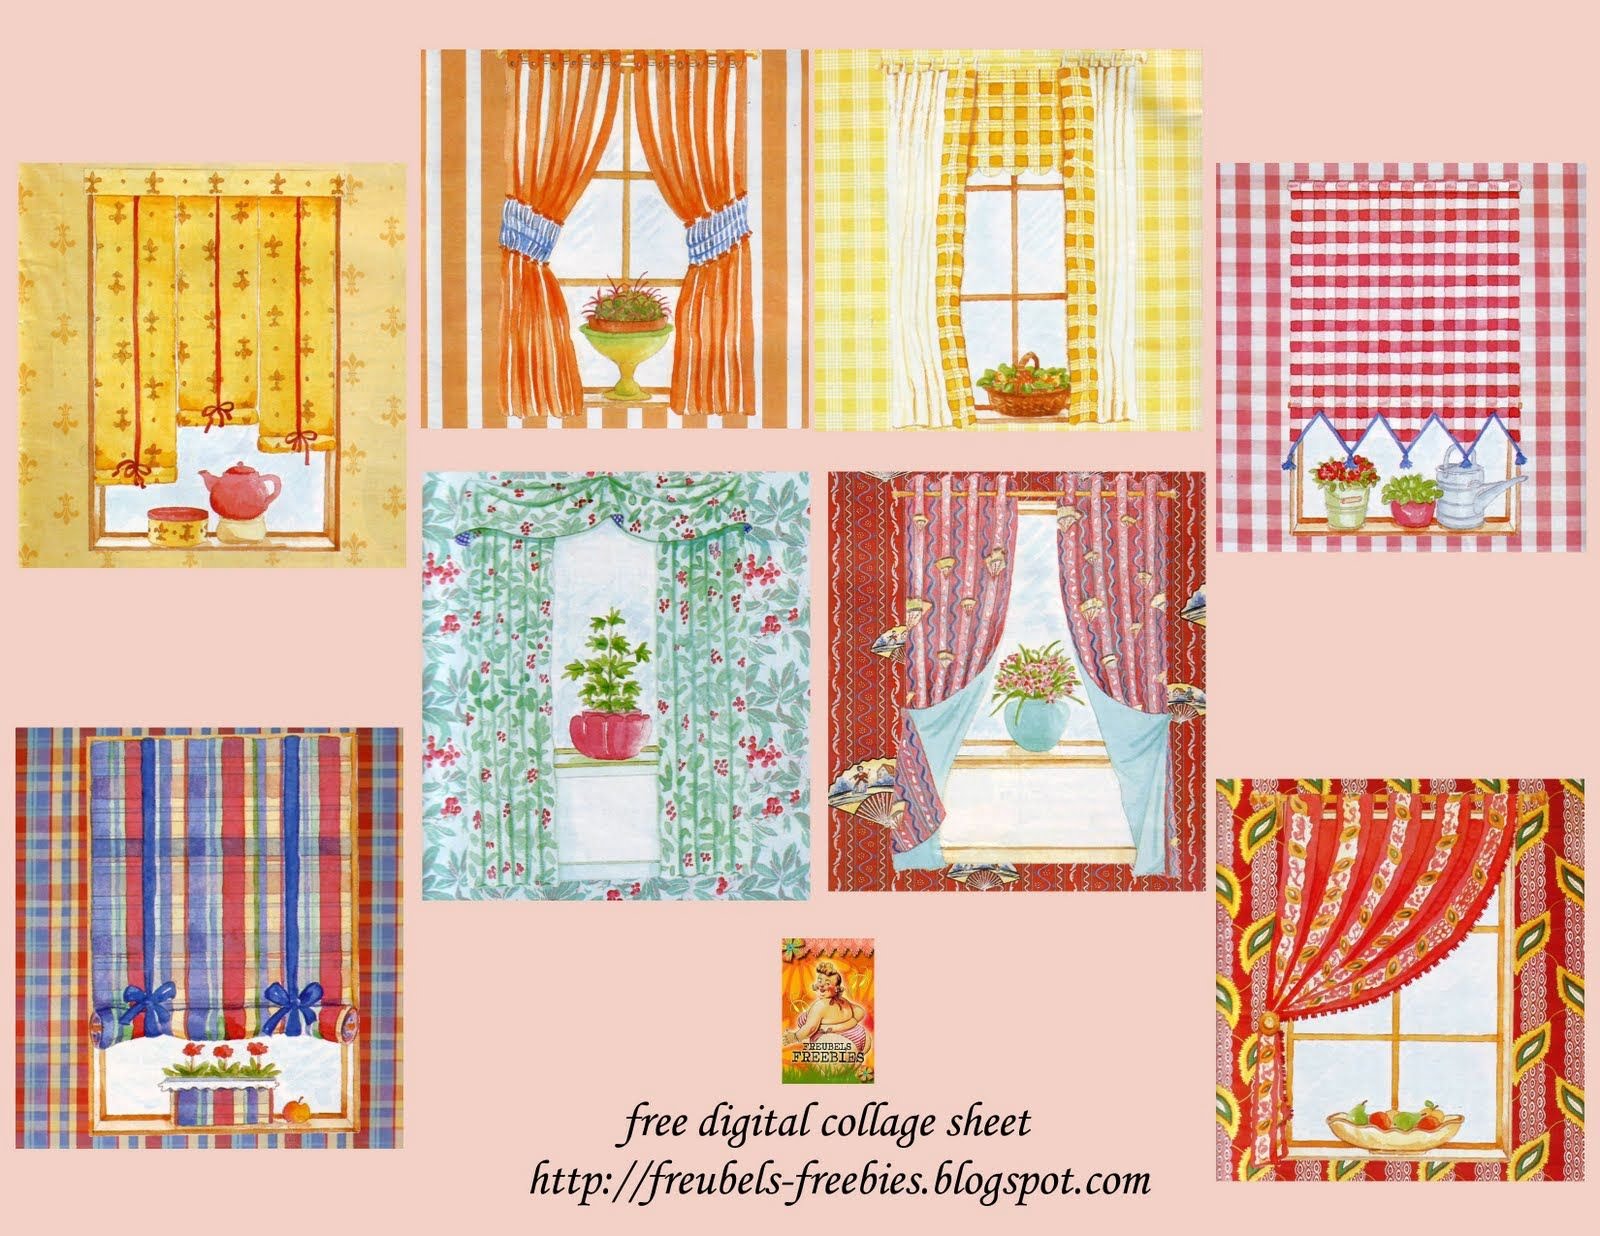 Freubels freebies Paper Doll House Doll House Paper Dolls Printable